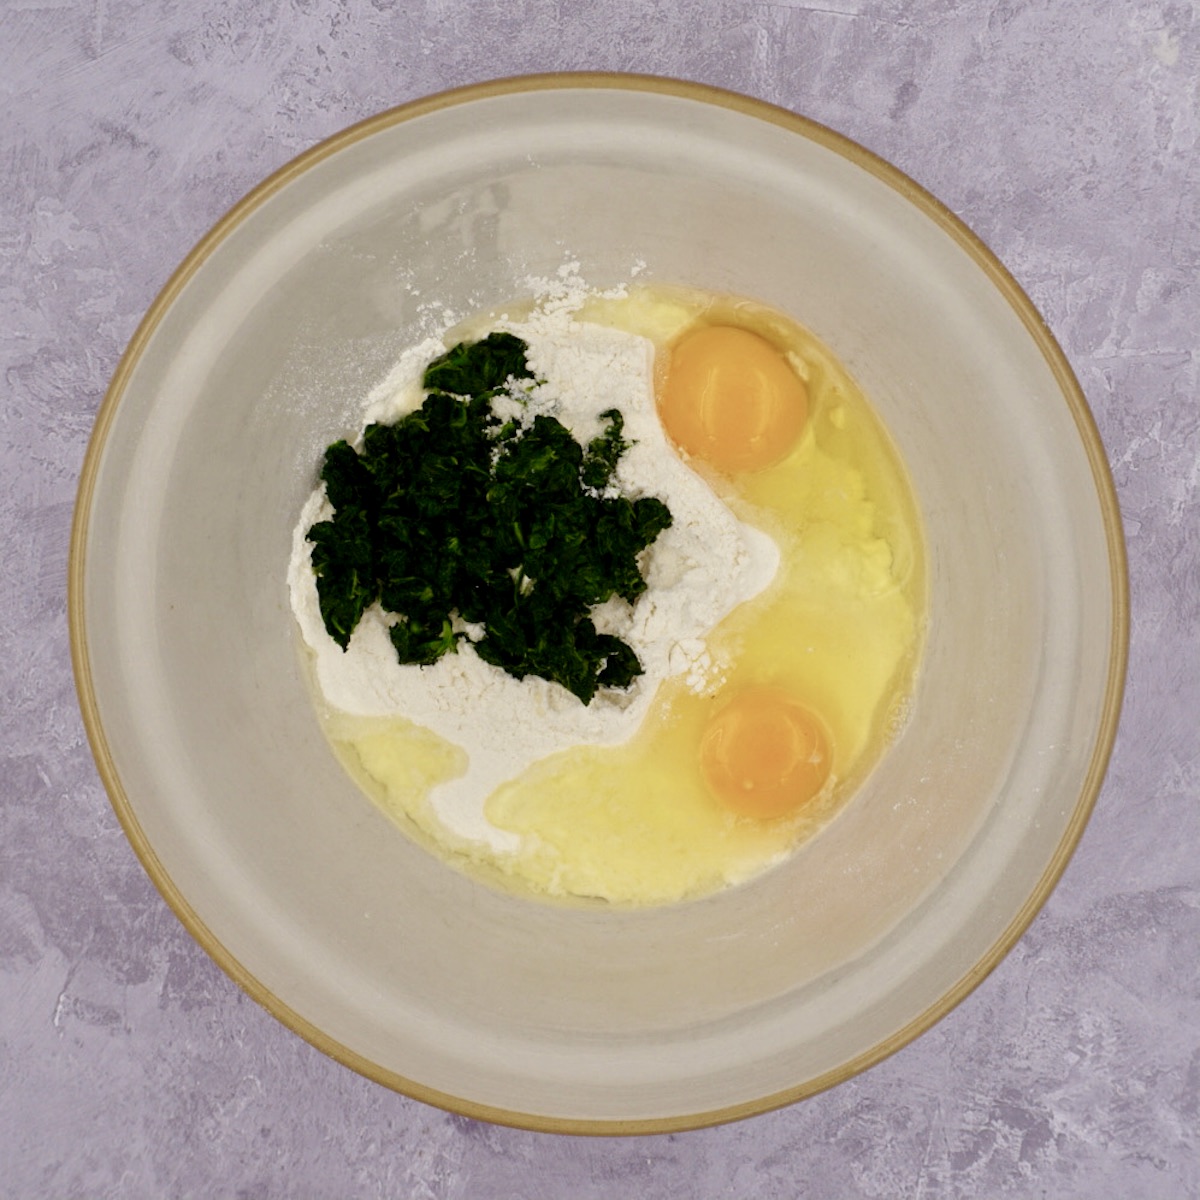 Flour, eggs and spinach in a bowl